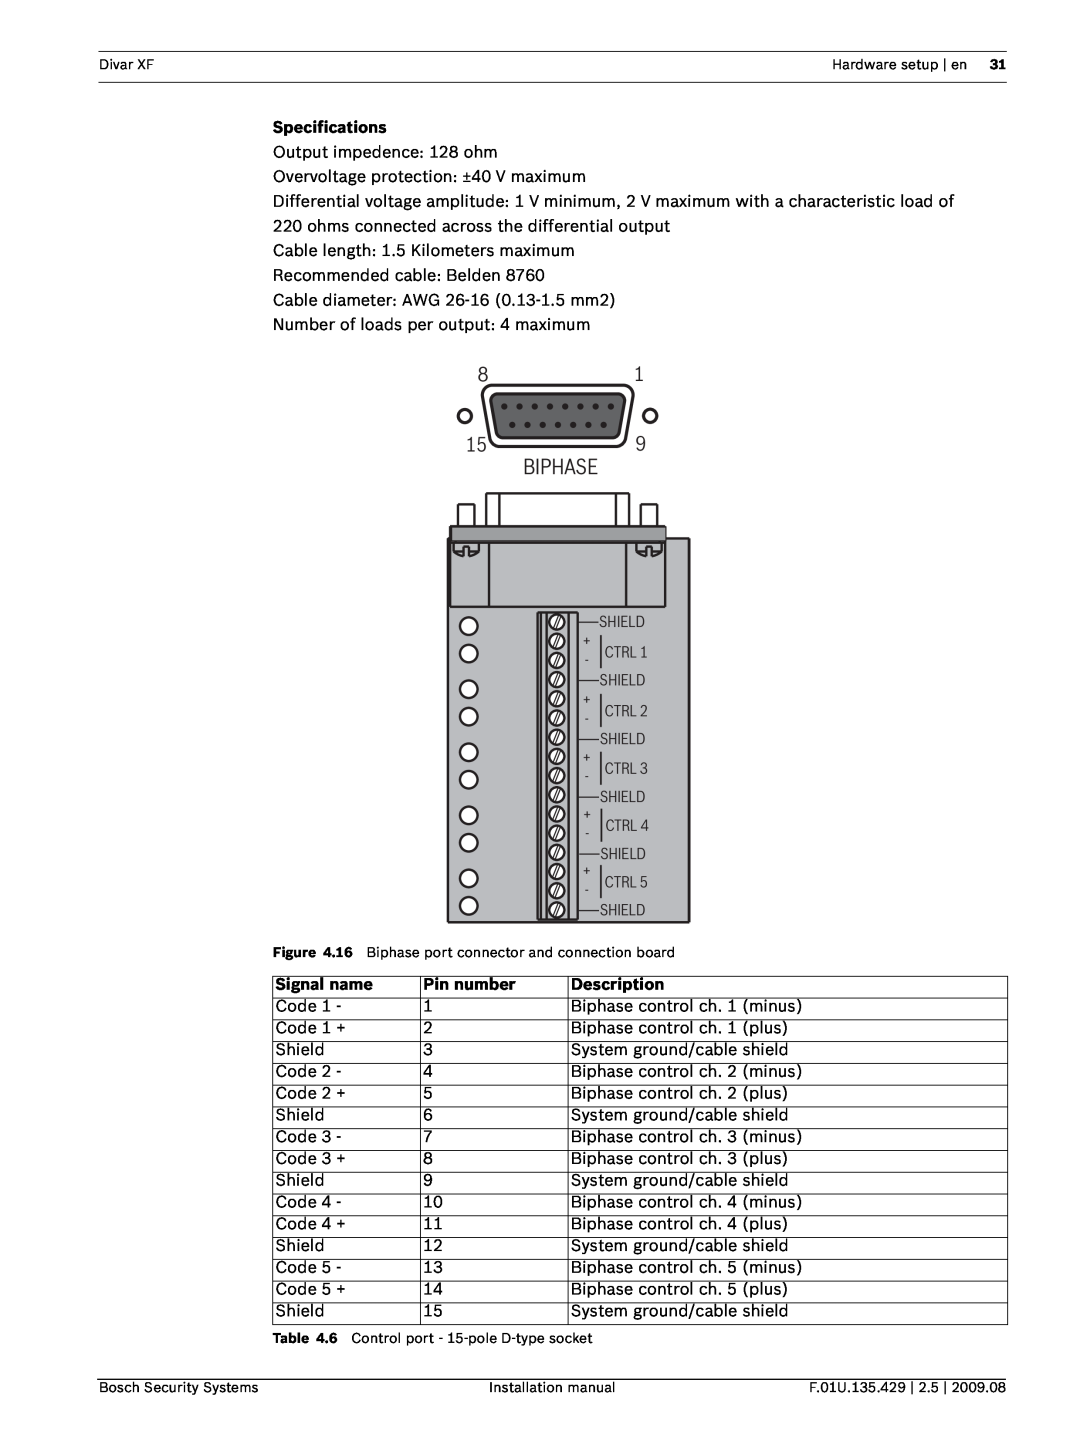 Bosch Appliances XF installation manual Biphase, Specifications, Signal name, Pin number, Description 